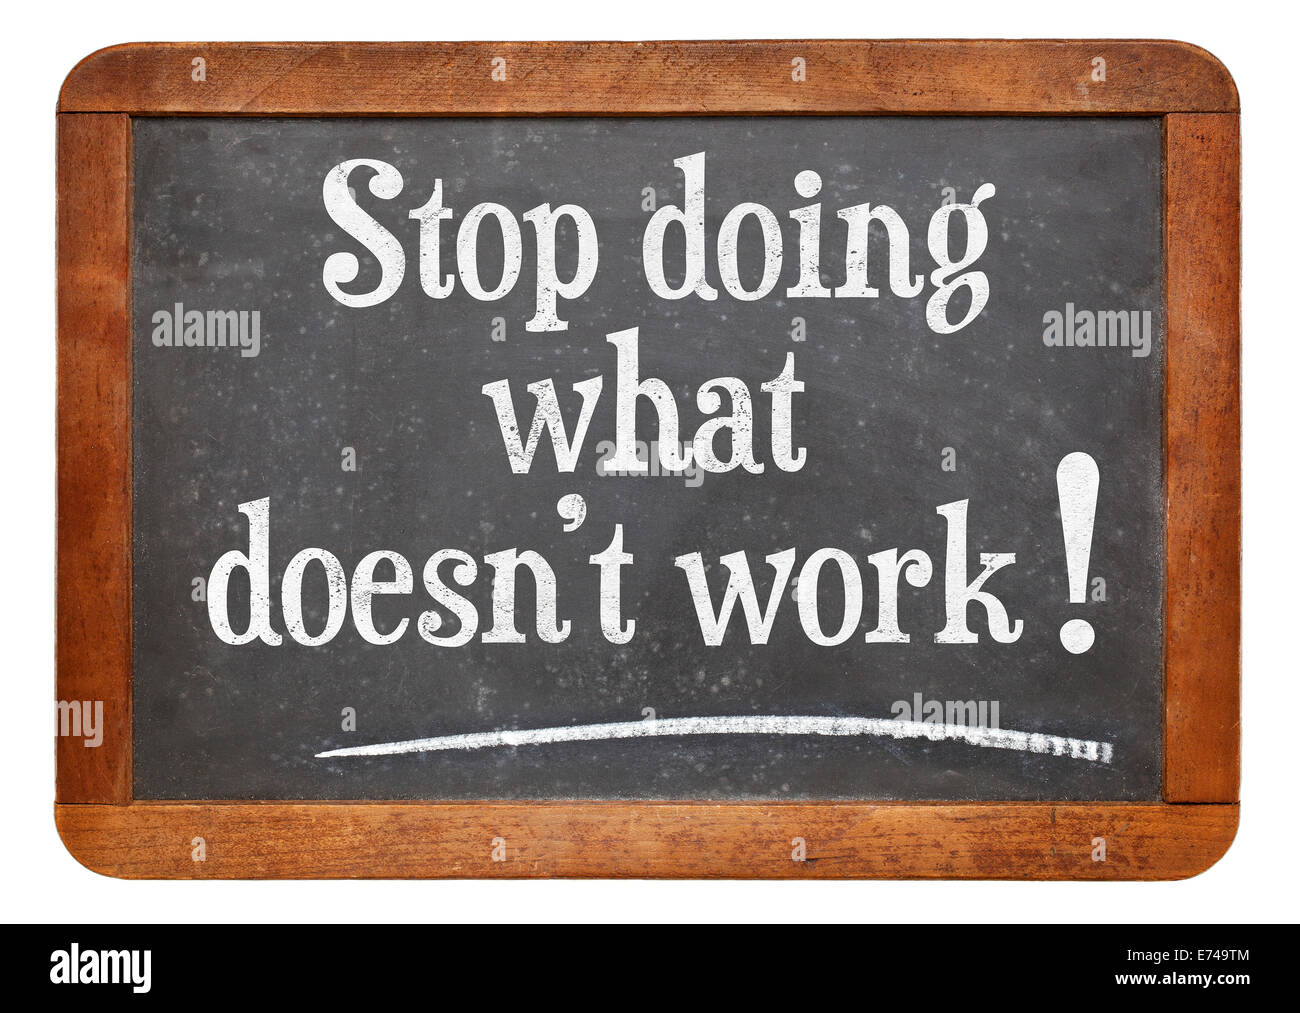 stop doing what does not work  advice on a vintage slate blackboard Stock Photo